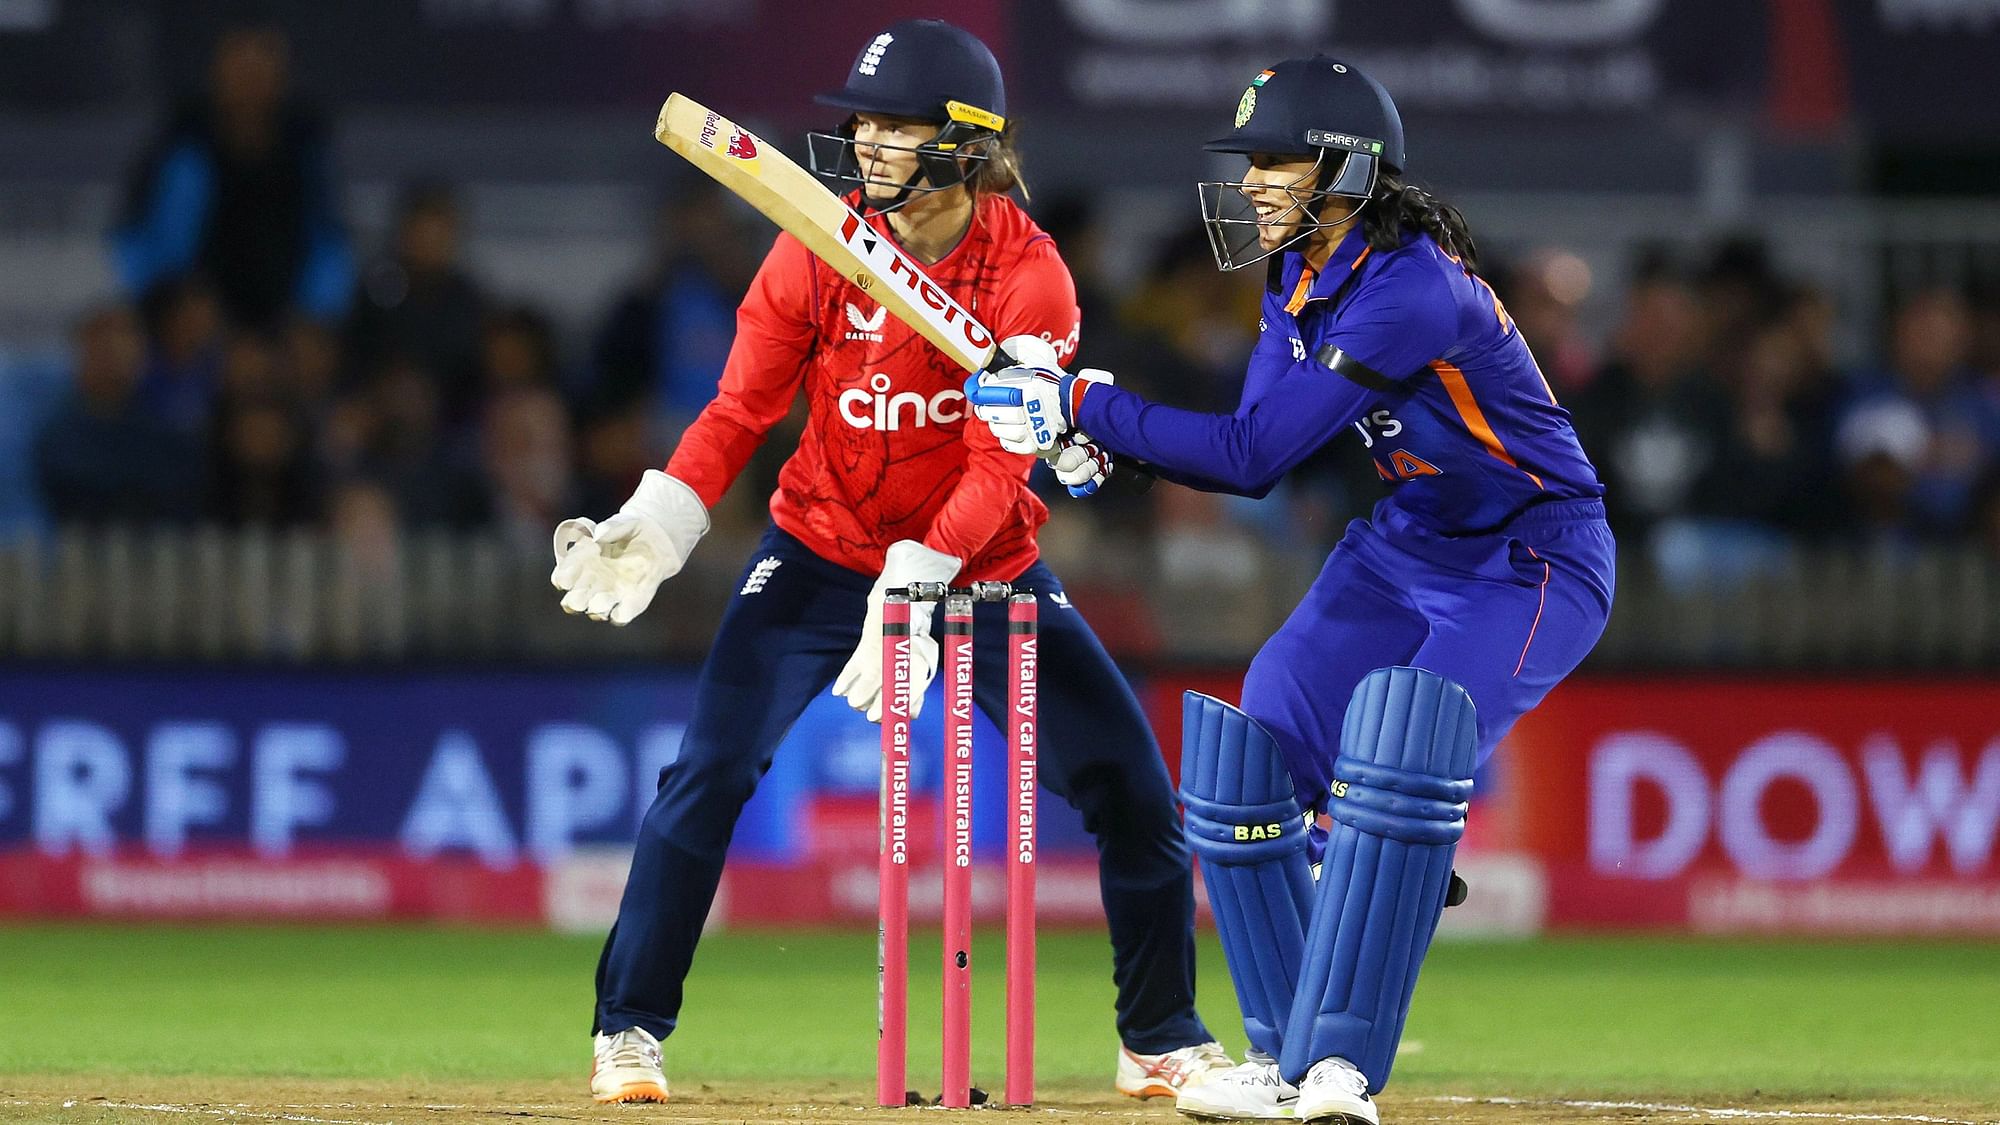 <div class="paragraphs"><p>Smriti Mandhana plays a shot during the second T20I between the Indian women's team and England women's team in Derby on Tuesday.&nbsp;</p></div>